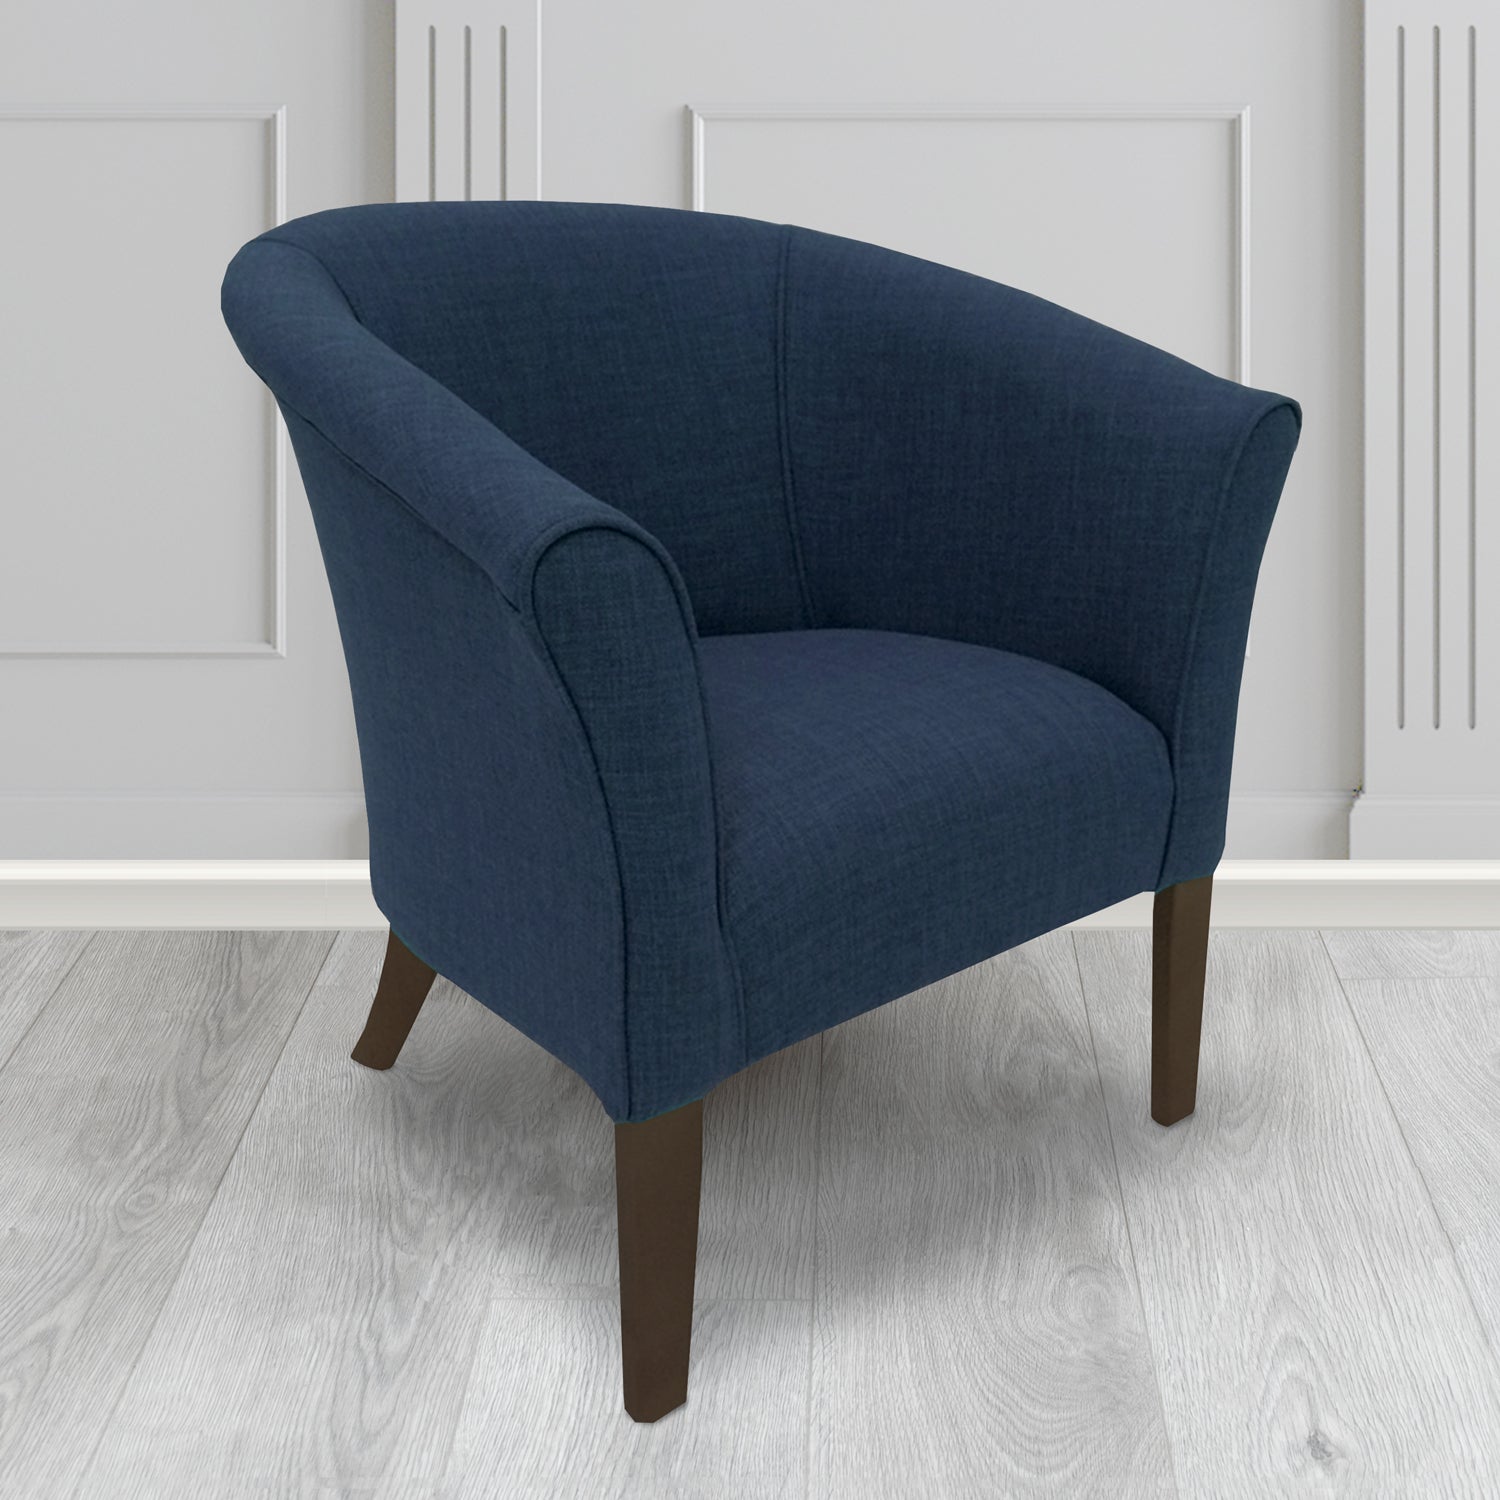 Quill Tub Chair in Linetta Midnight Crib 5 Plain Fabric - Antimicrobial, Stain Resistant & Waterproof - The Tub Chair Shop